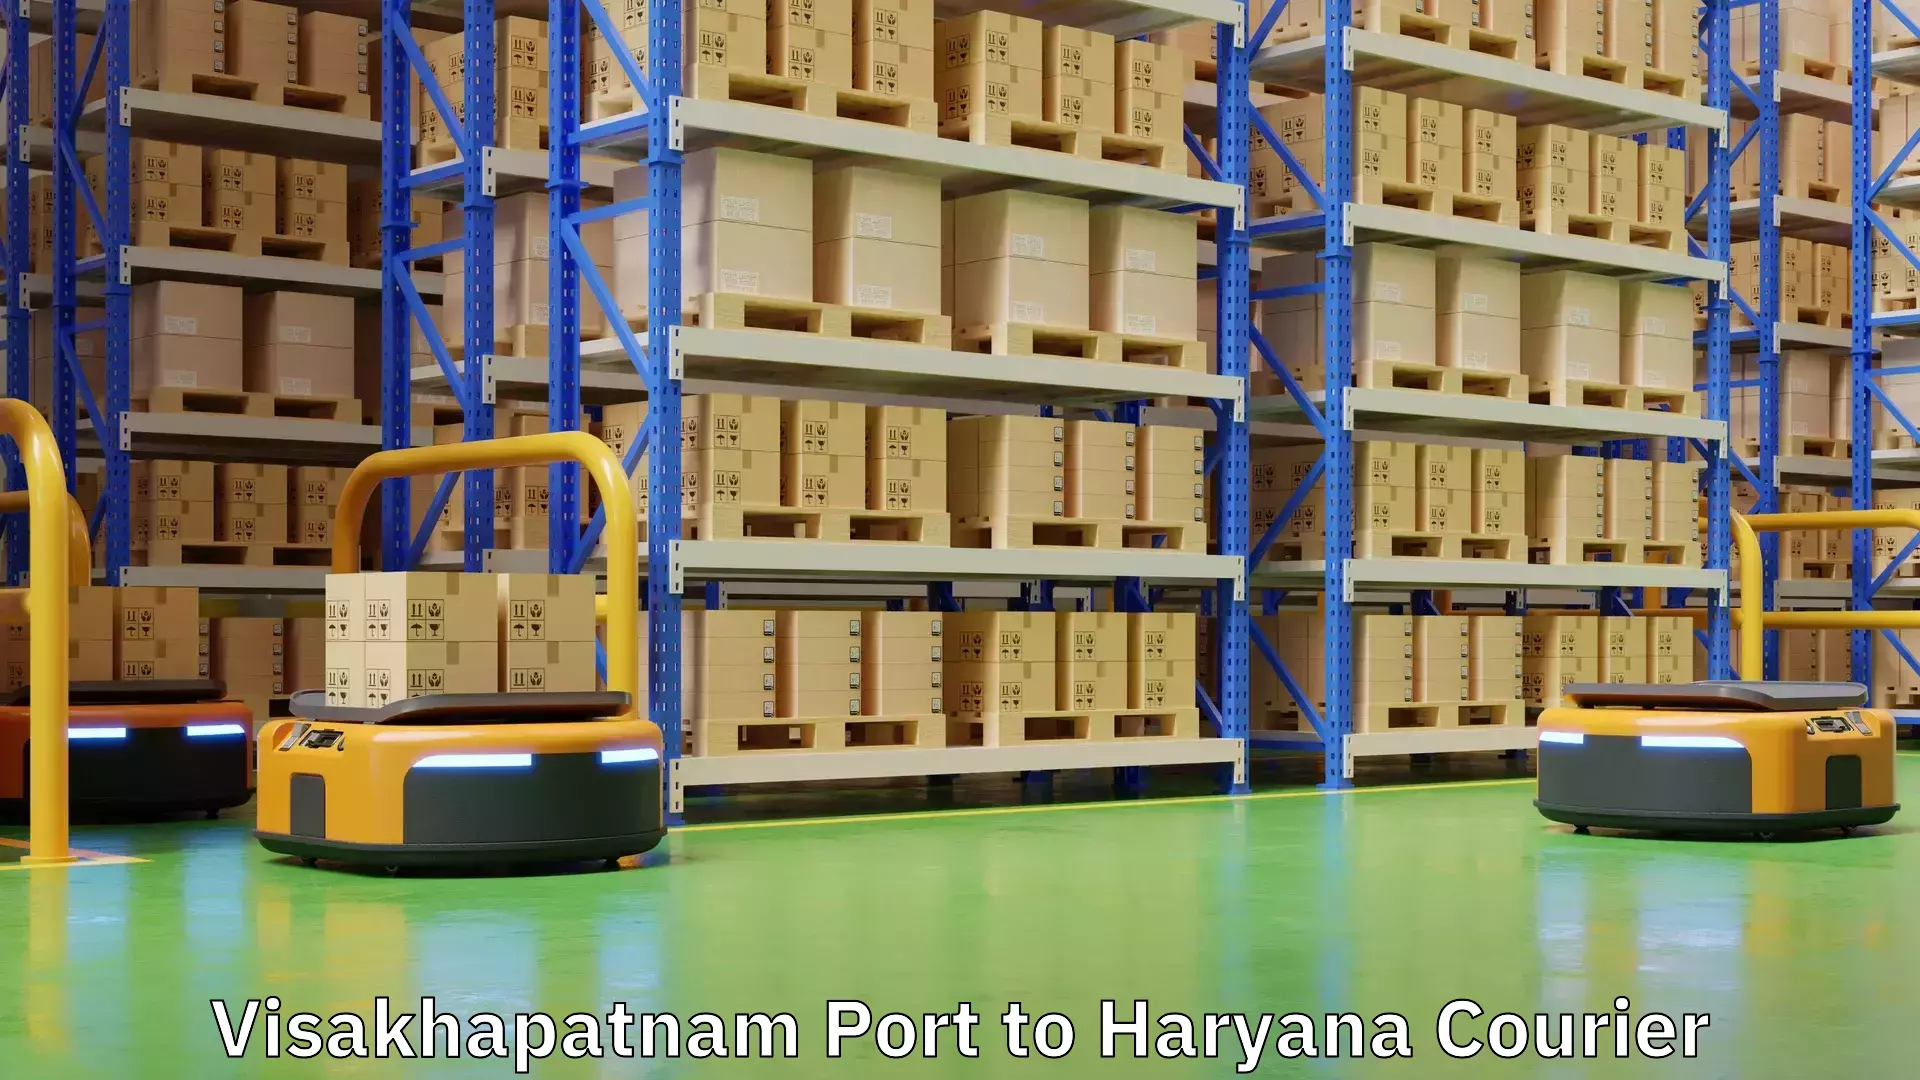 Flexible delivery scheduling Visakhapatnam Port to Haryana